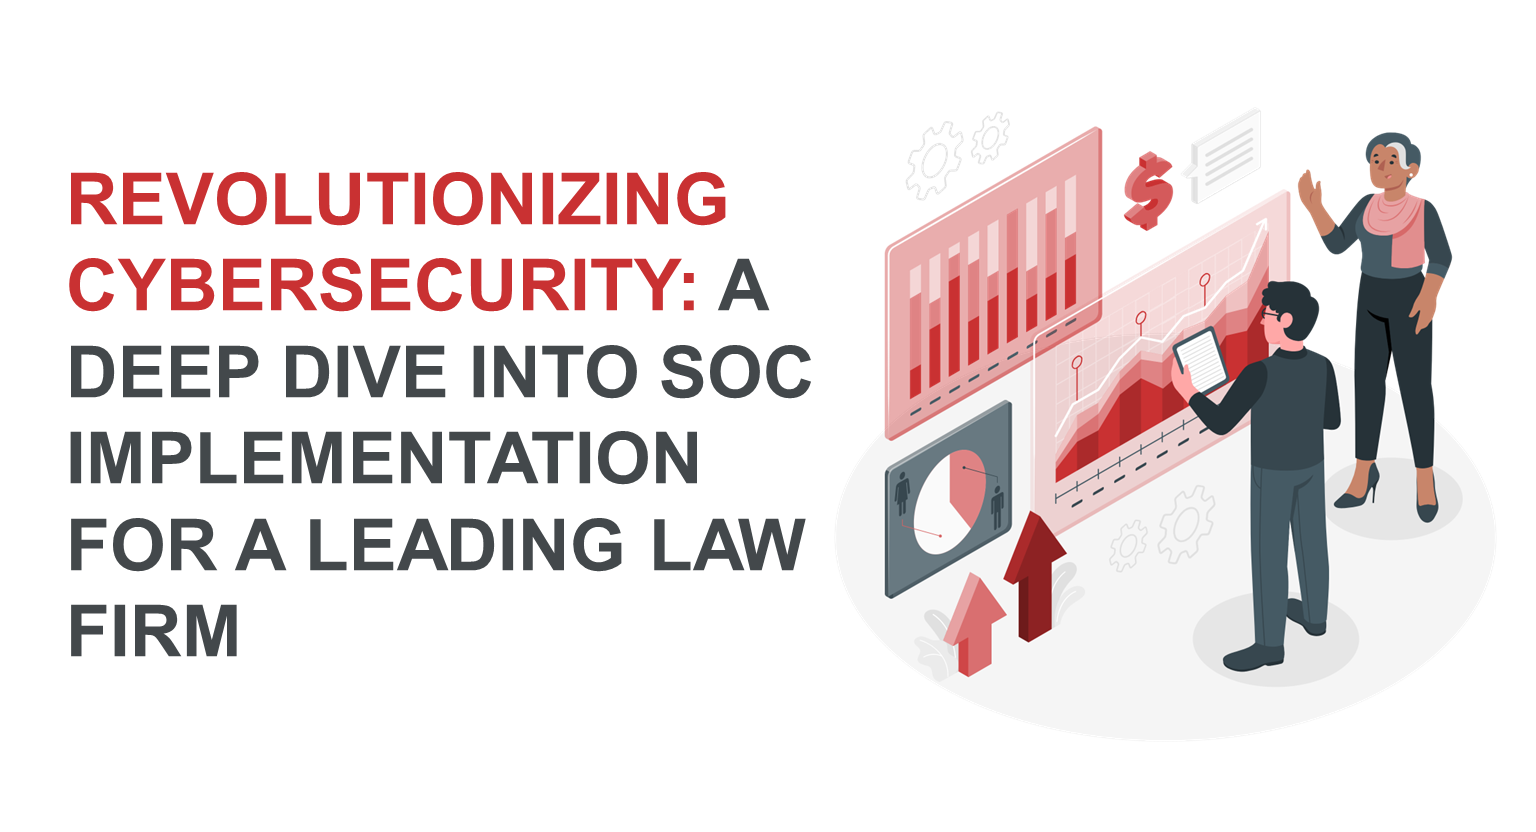 Revolutionizing Cybersecurity: A Deep Dive into SOC Implementation for a Leading Law Firm 